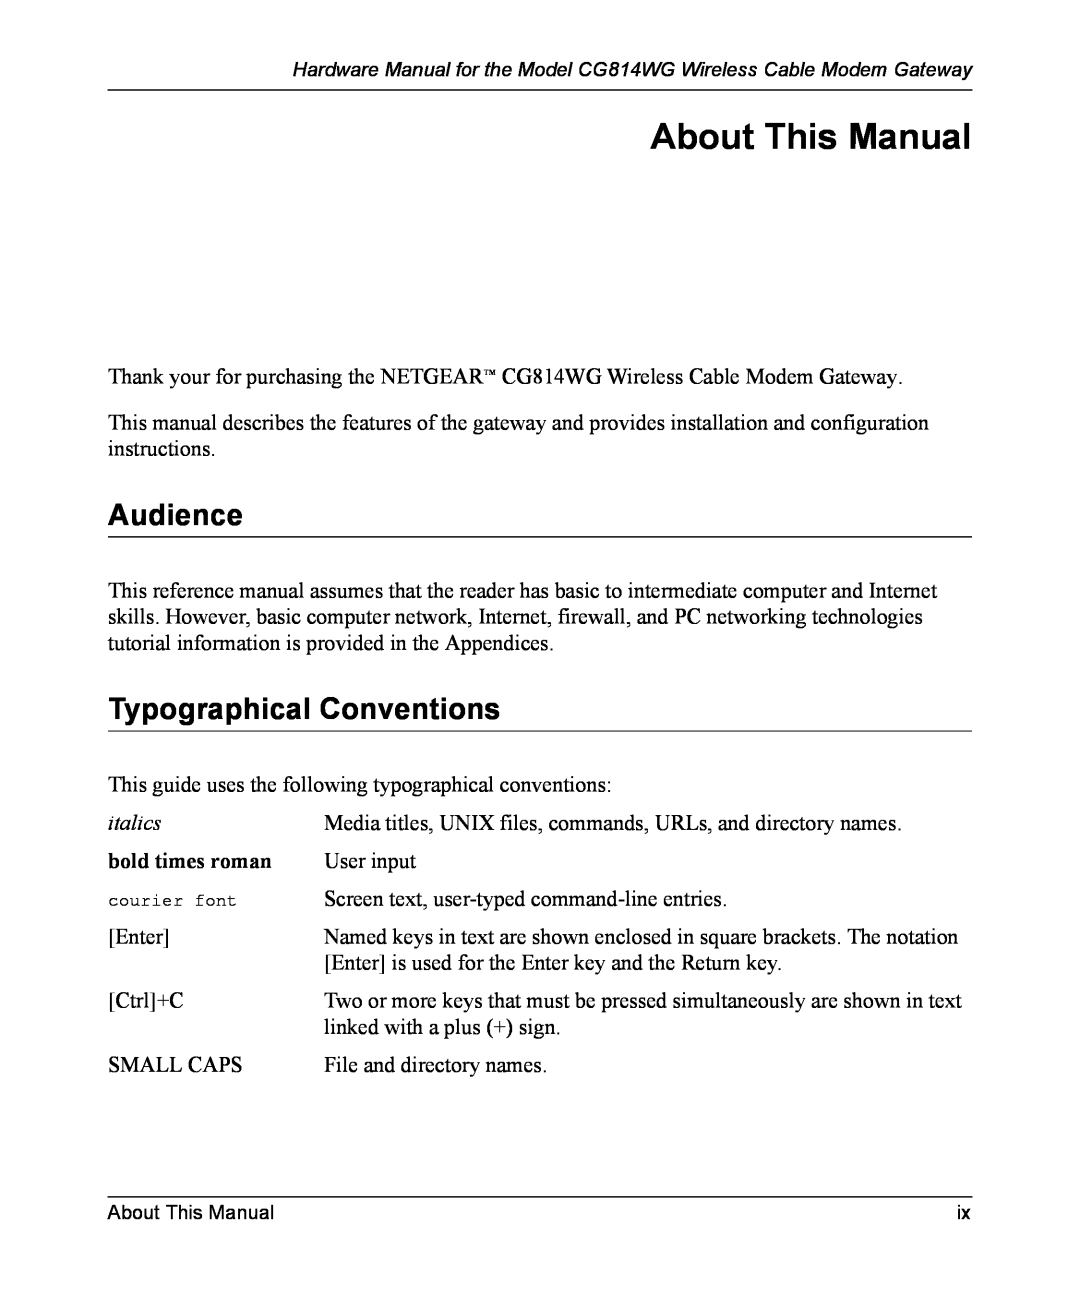 NETGEAR CG814WG manual About This Manual, Audience, Typographical Conventions, bold times roman 